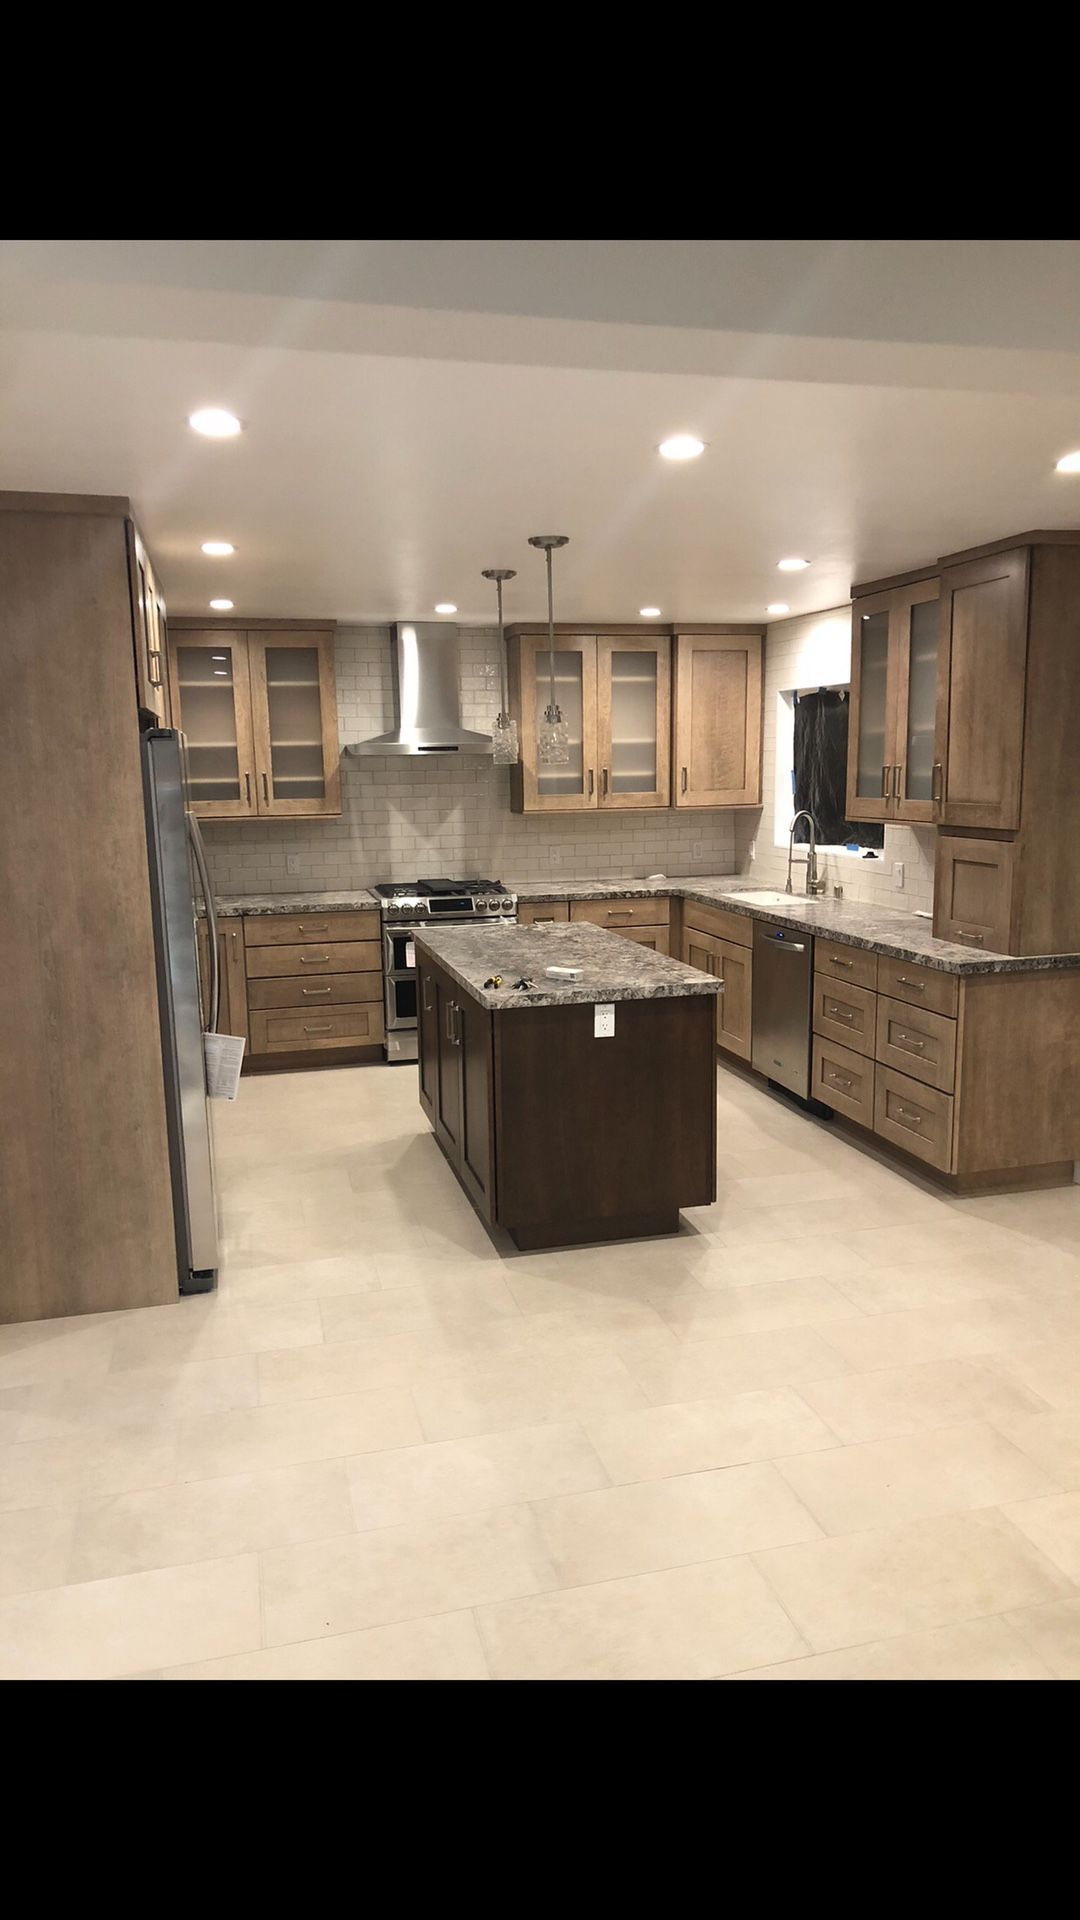 Kitchen cabinets and countertop